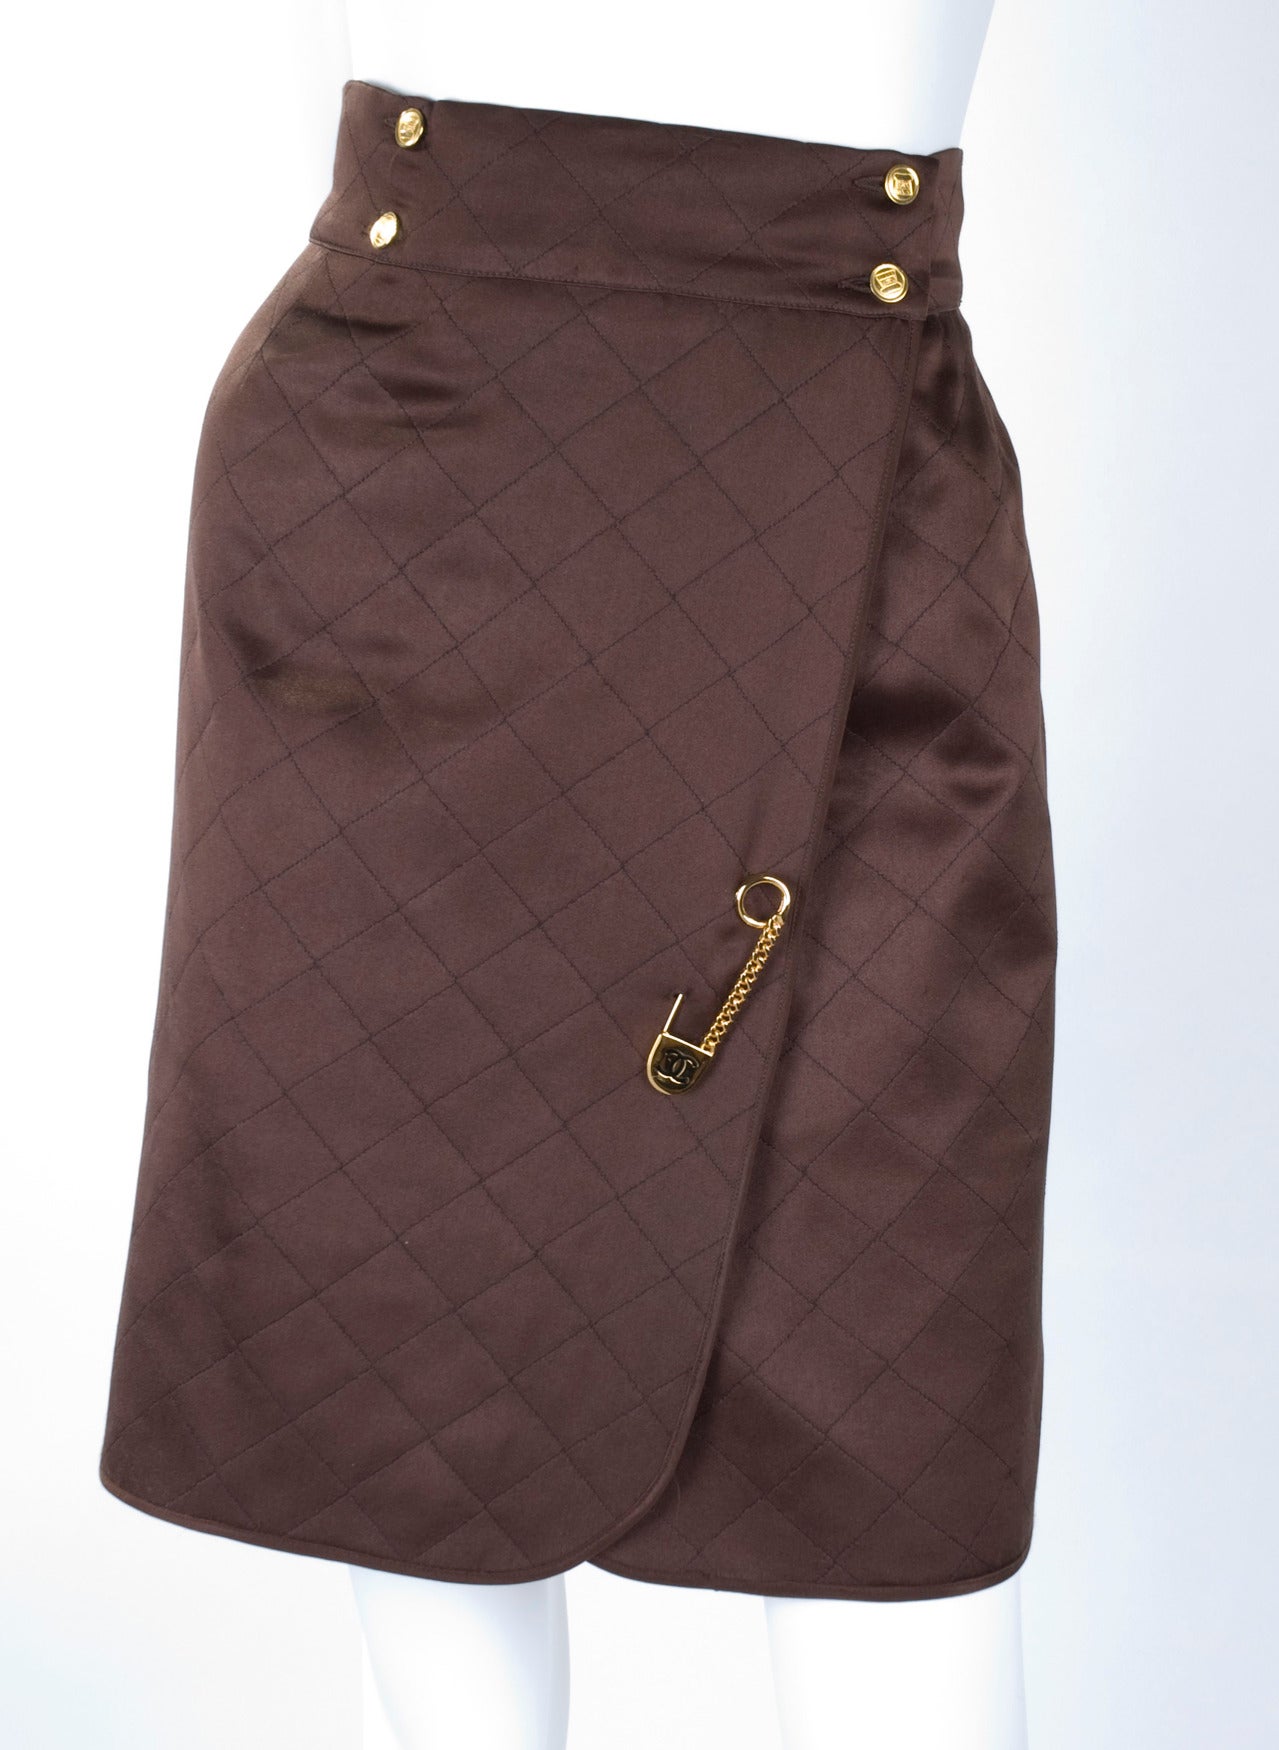 Black Vintage Brown Chanel Wrap Skirt With CC Safety Pin